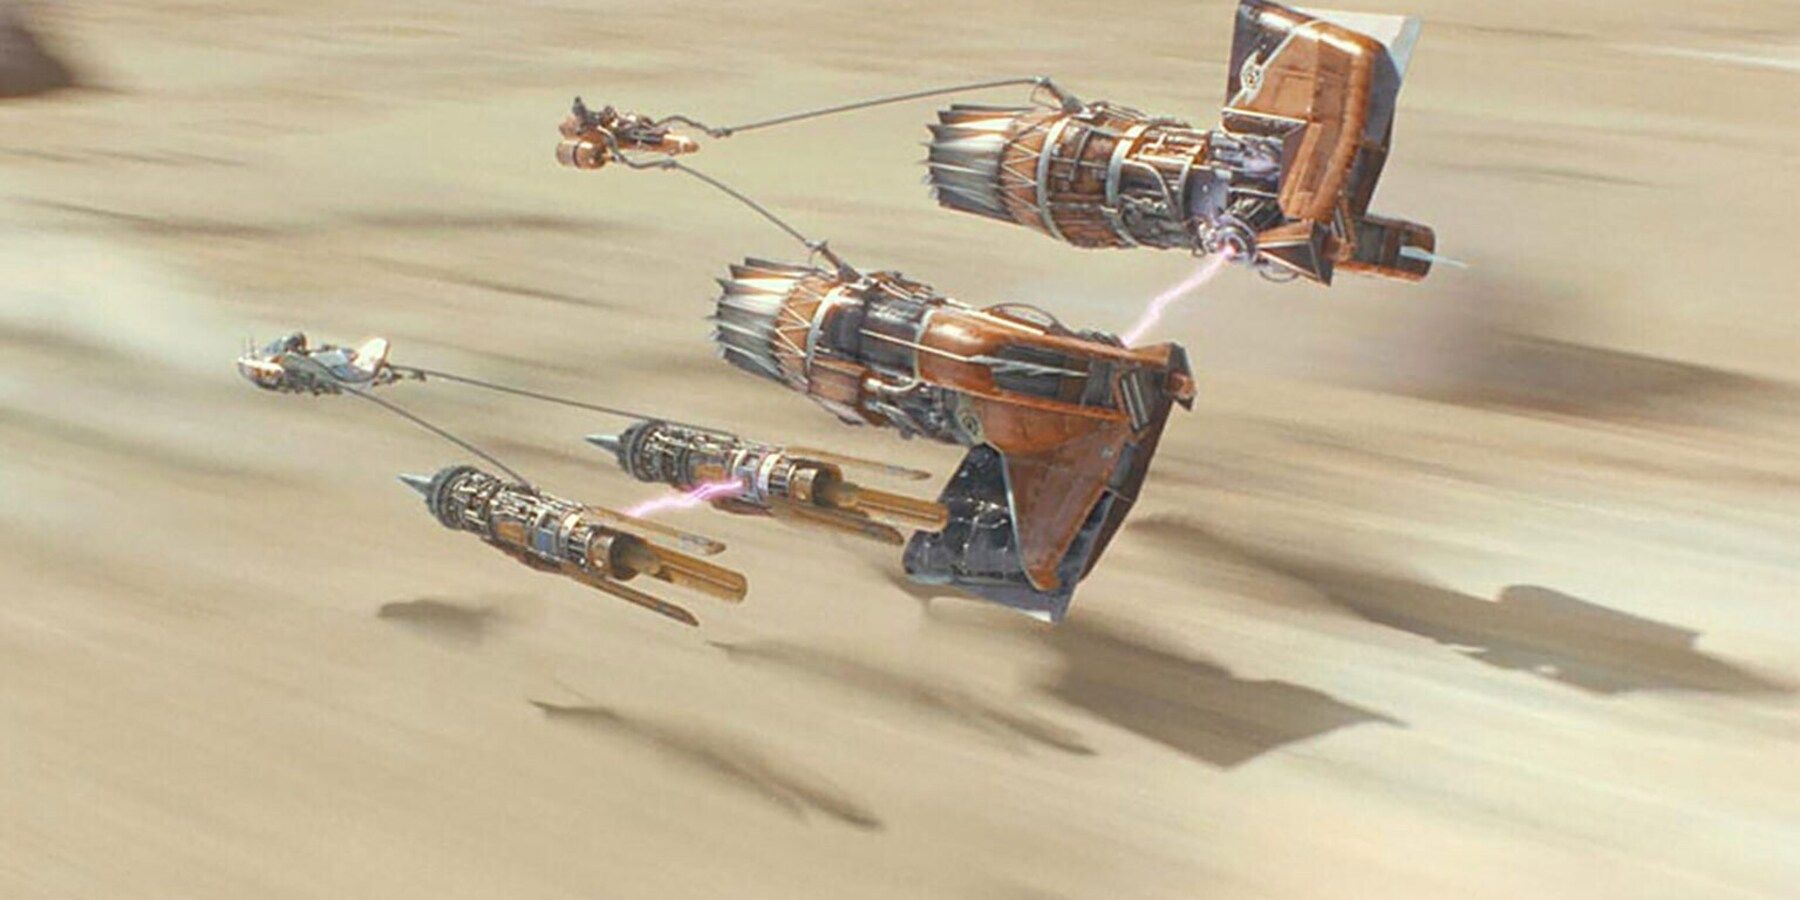 Anakin races alongside another competitor in Star Wars